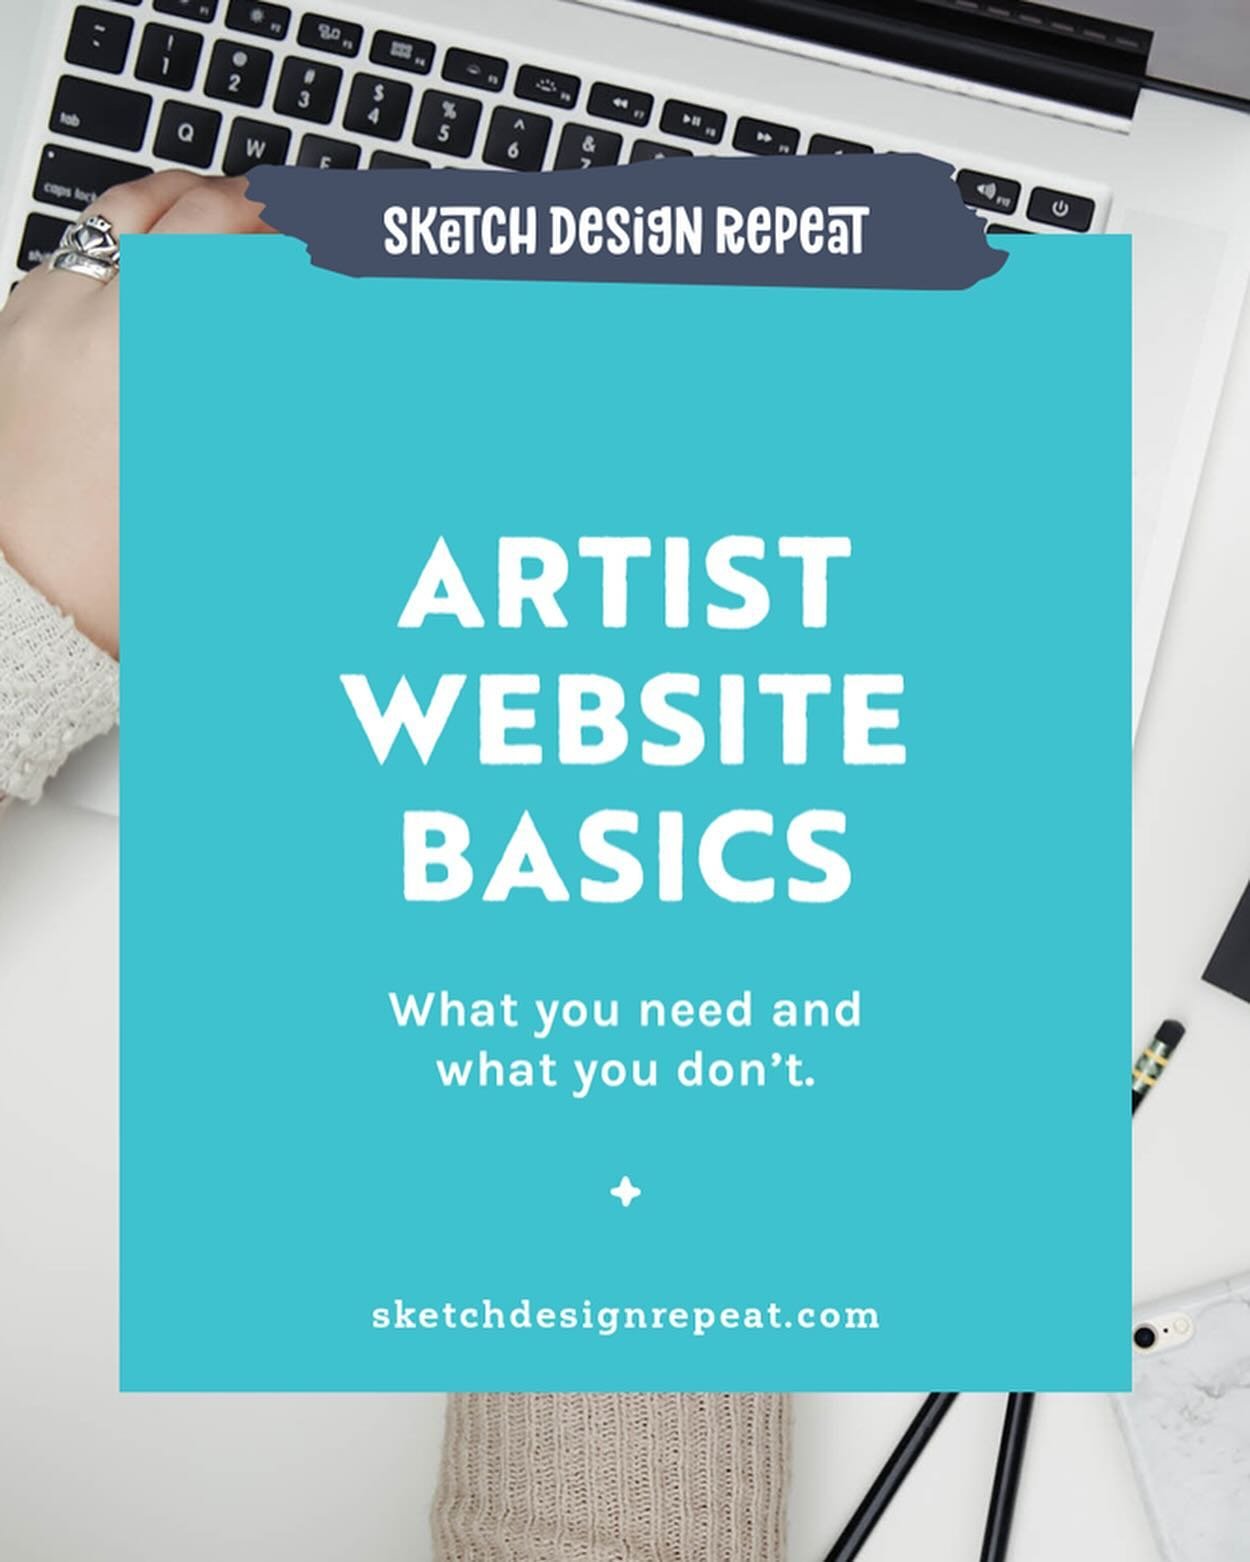 Things have been so crazy here I totally forgot ~ I&rsquo;ve got a new blog post live on @sketchdesignrepeat!! If you&rsquo;re a surface pattern designer or artist and have been dragging your feet on your website, here&rsquo;s what you need, and what